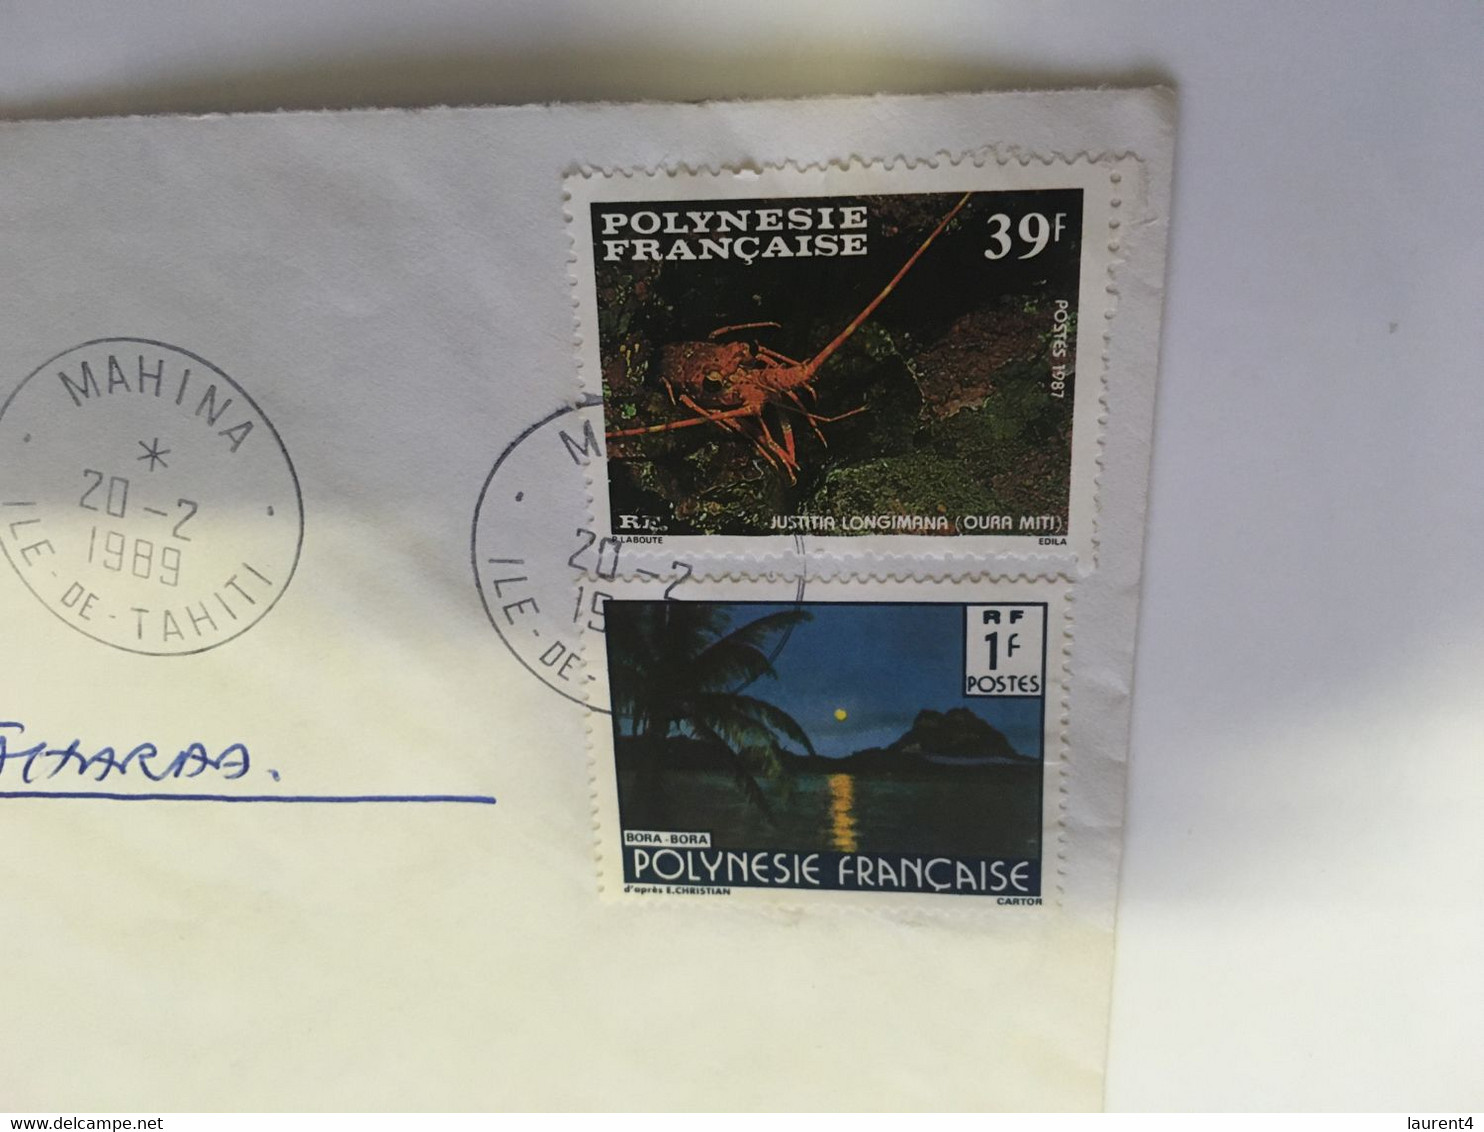 (SS 3) Polynesie Francçise  French Polynesia - 1989 =  2 Stamps On COMAT Cover - Briefe U. Dokumente